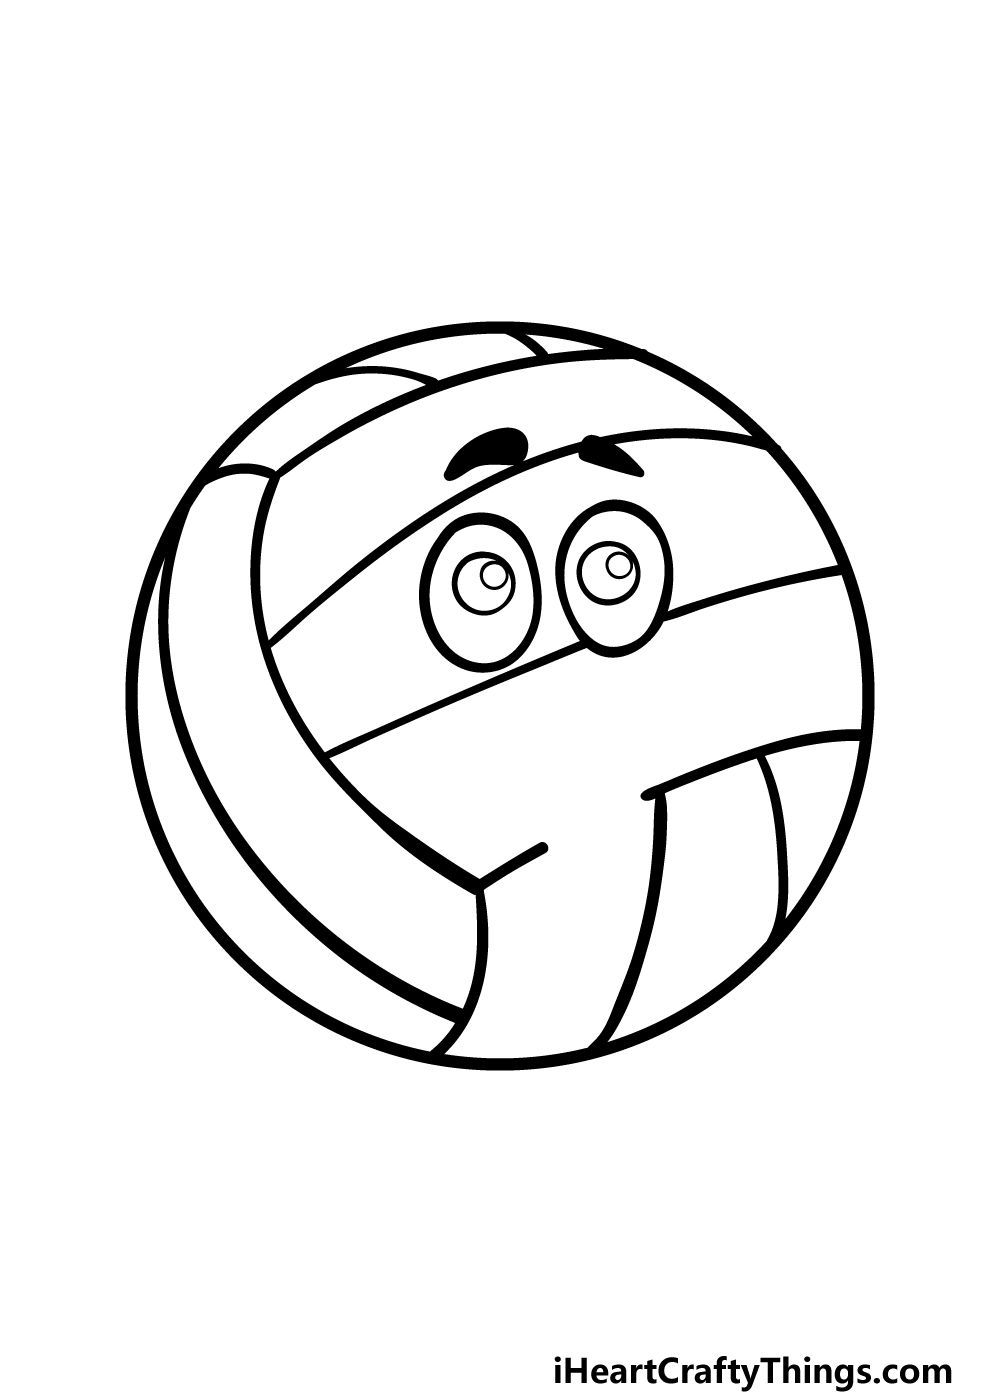 how to draw a cartoon volleyball step 5